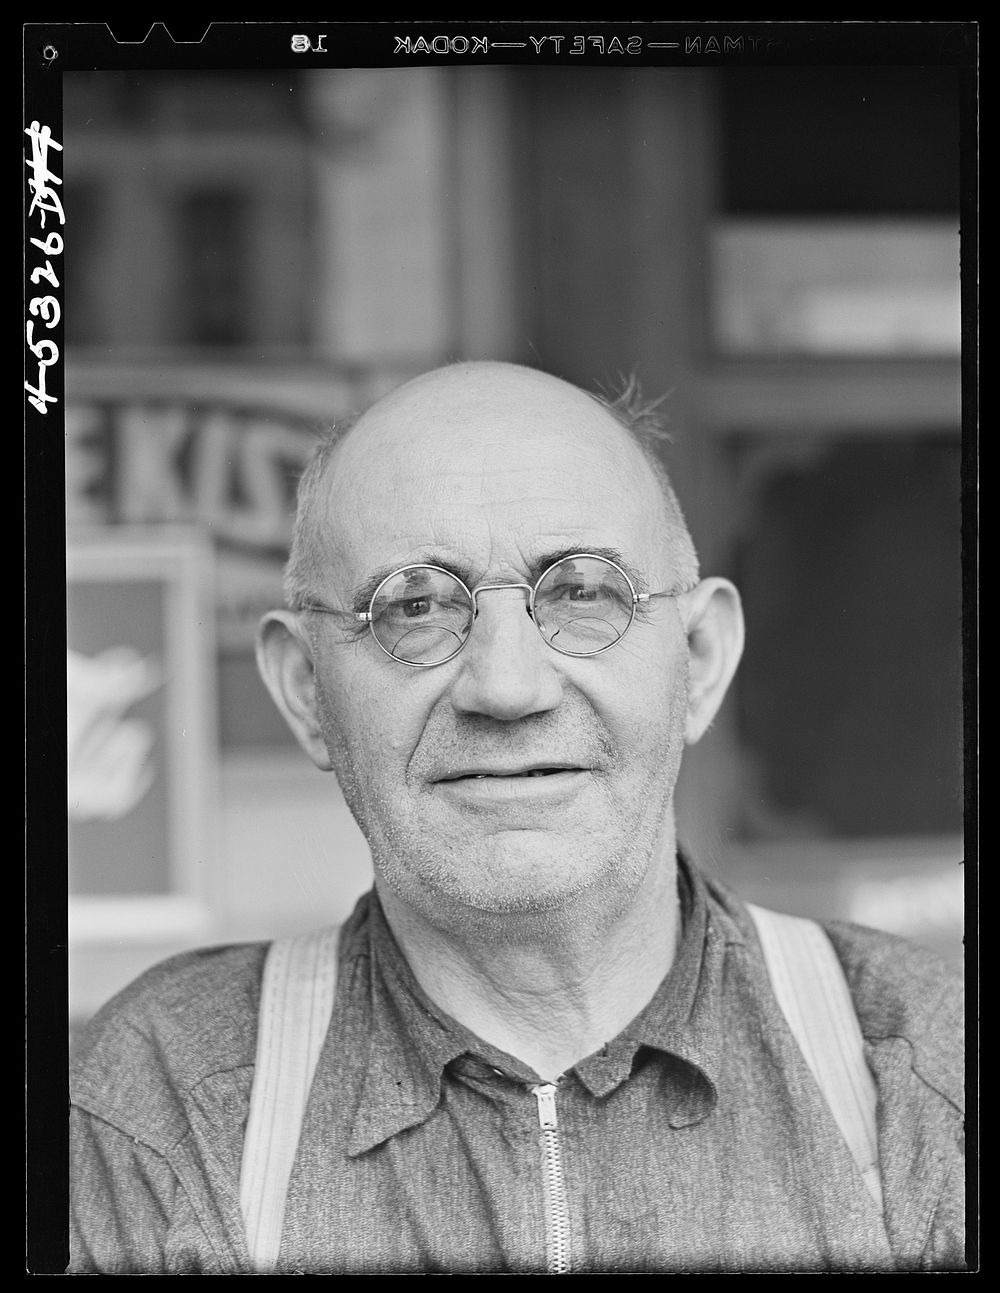 [Untitled photo, possibly related to: Mr. Merton Hoover, postmaster, sixty-three years old, who loses his position through…